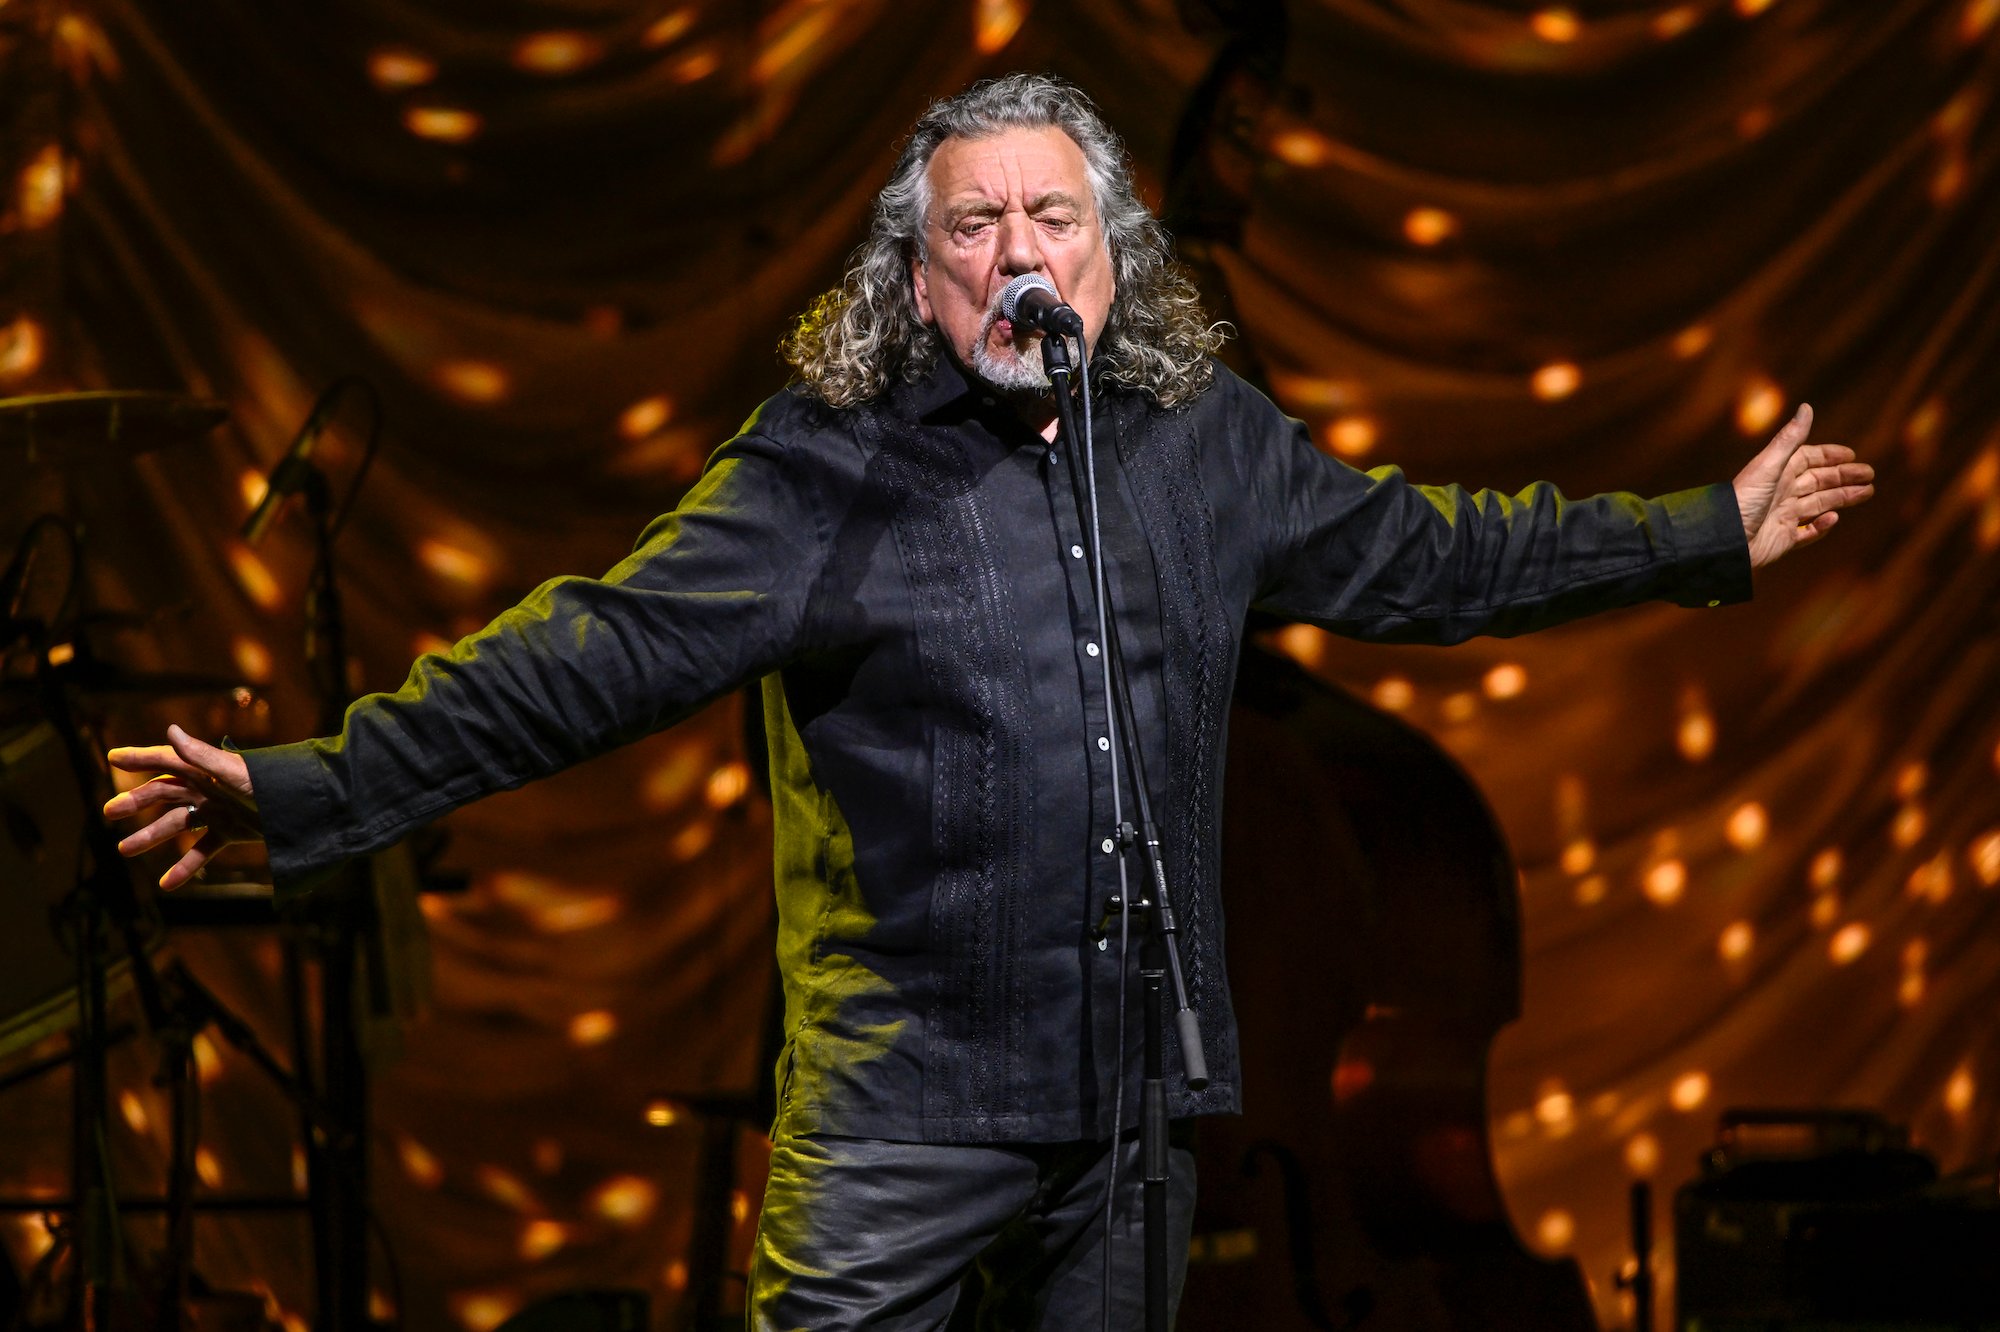 Led Zeppelin Singer Robert Plant Reveals How His Perspective of 'Stairway to Heaven' Has Changed